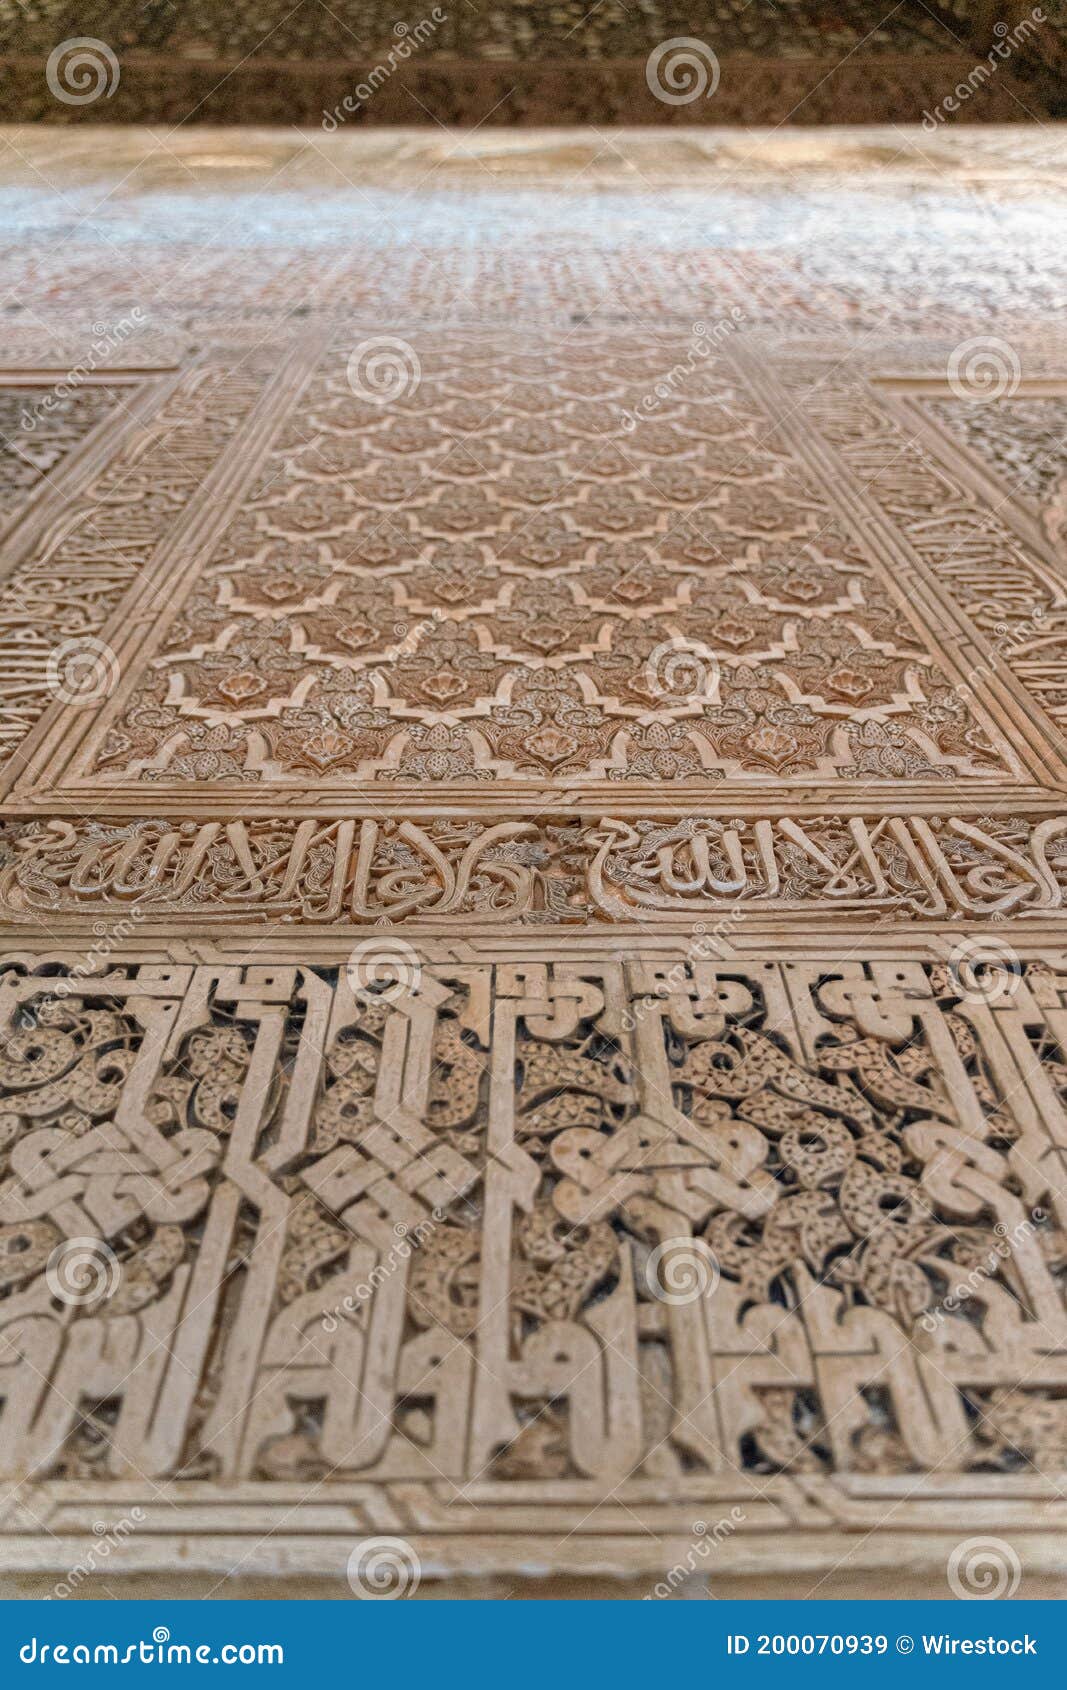 wall texture of the alhambra in granada, spain